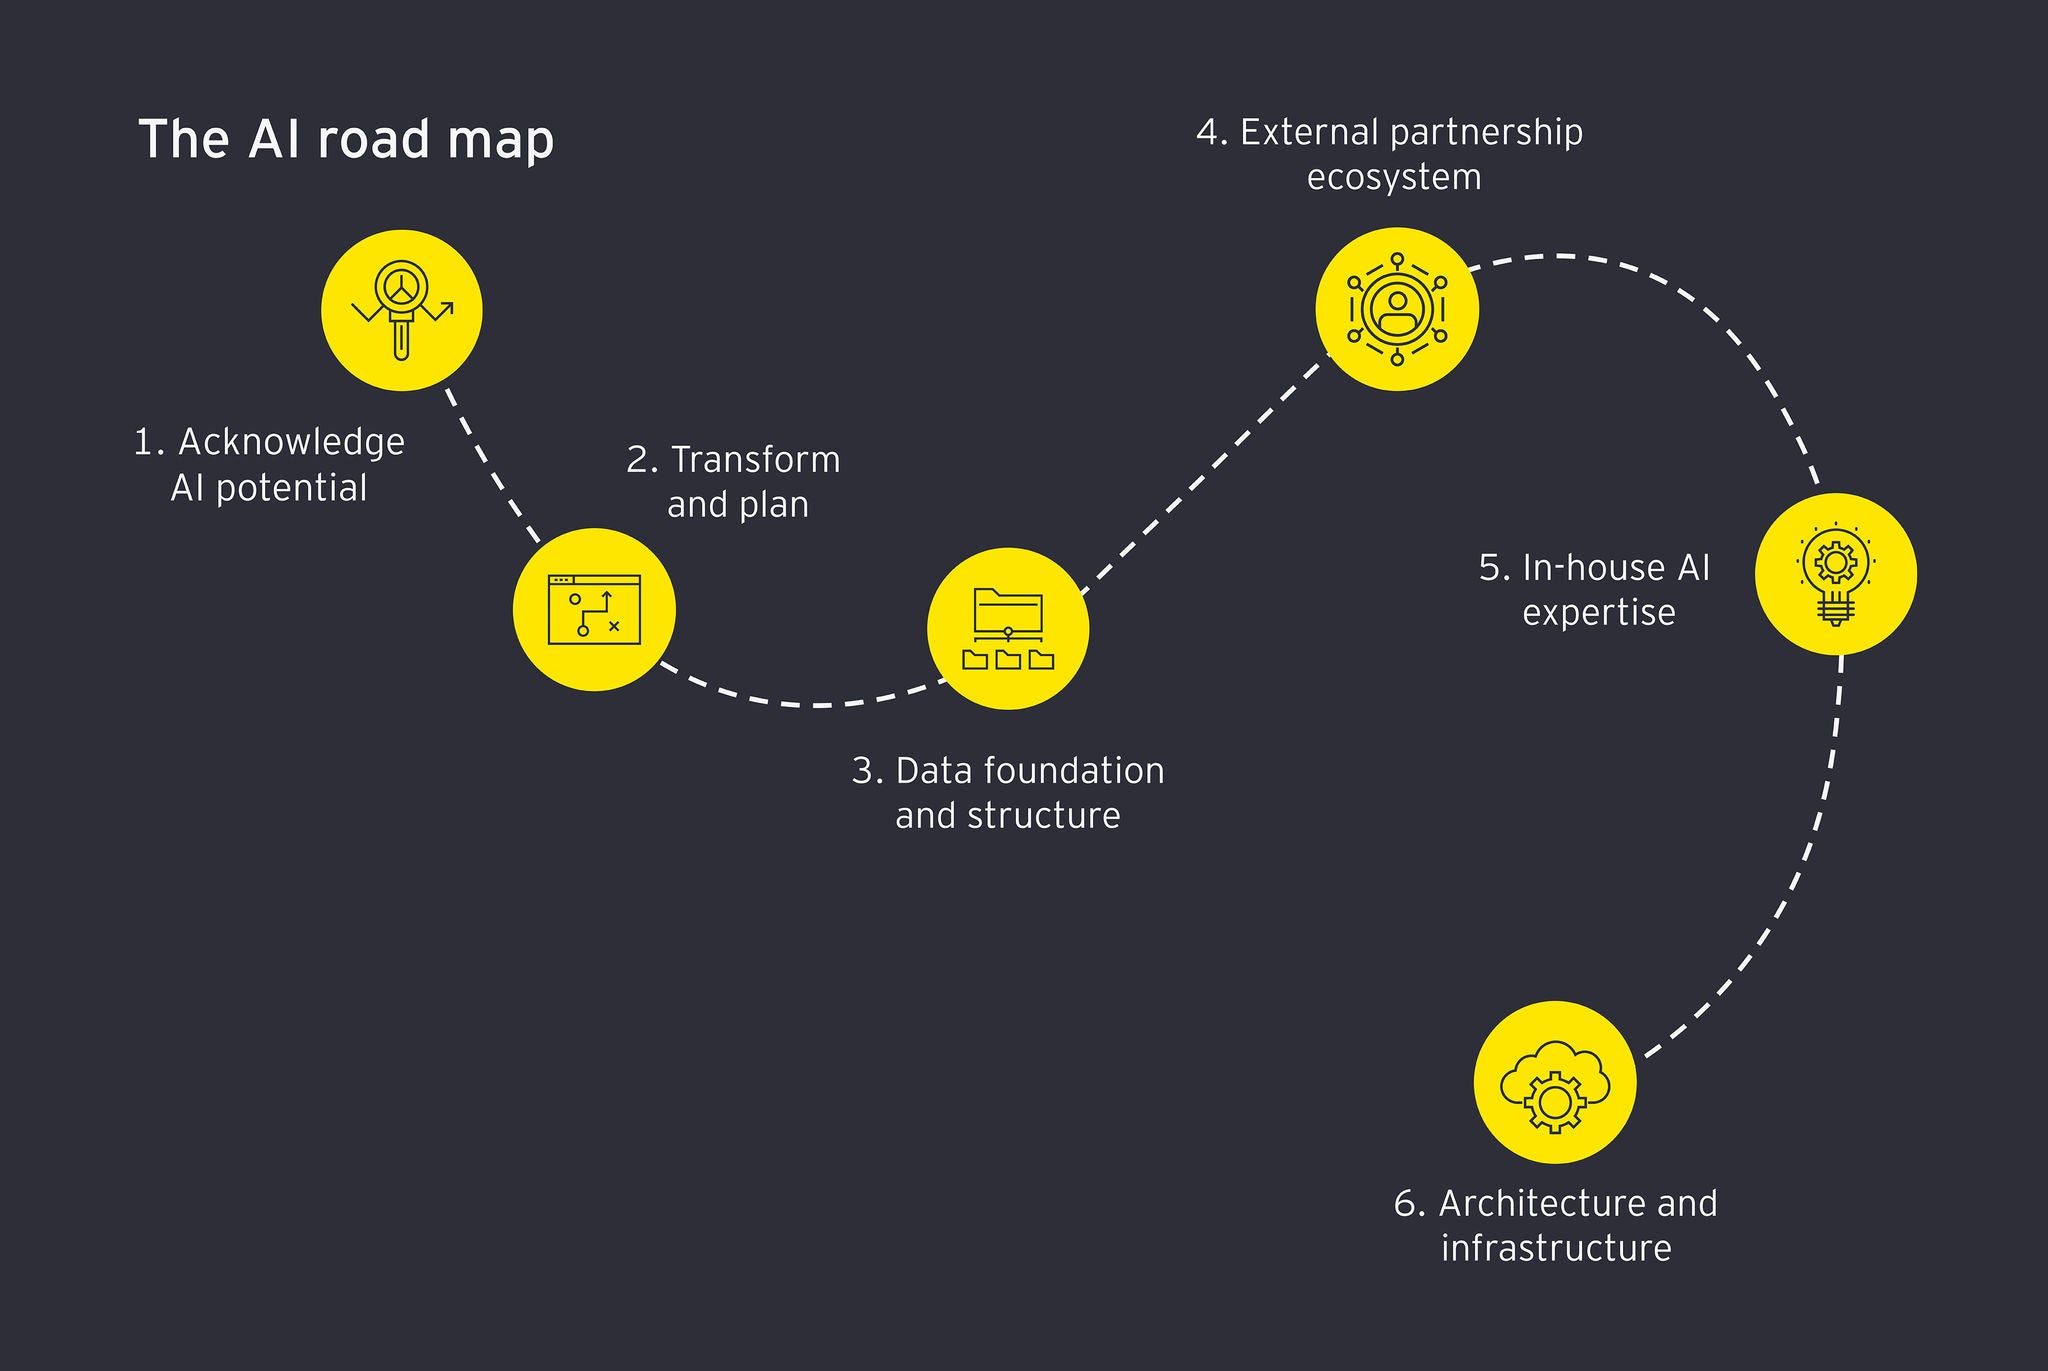 ey-the-ai-road-map